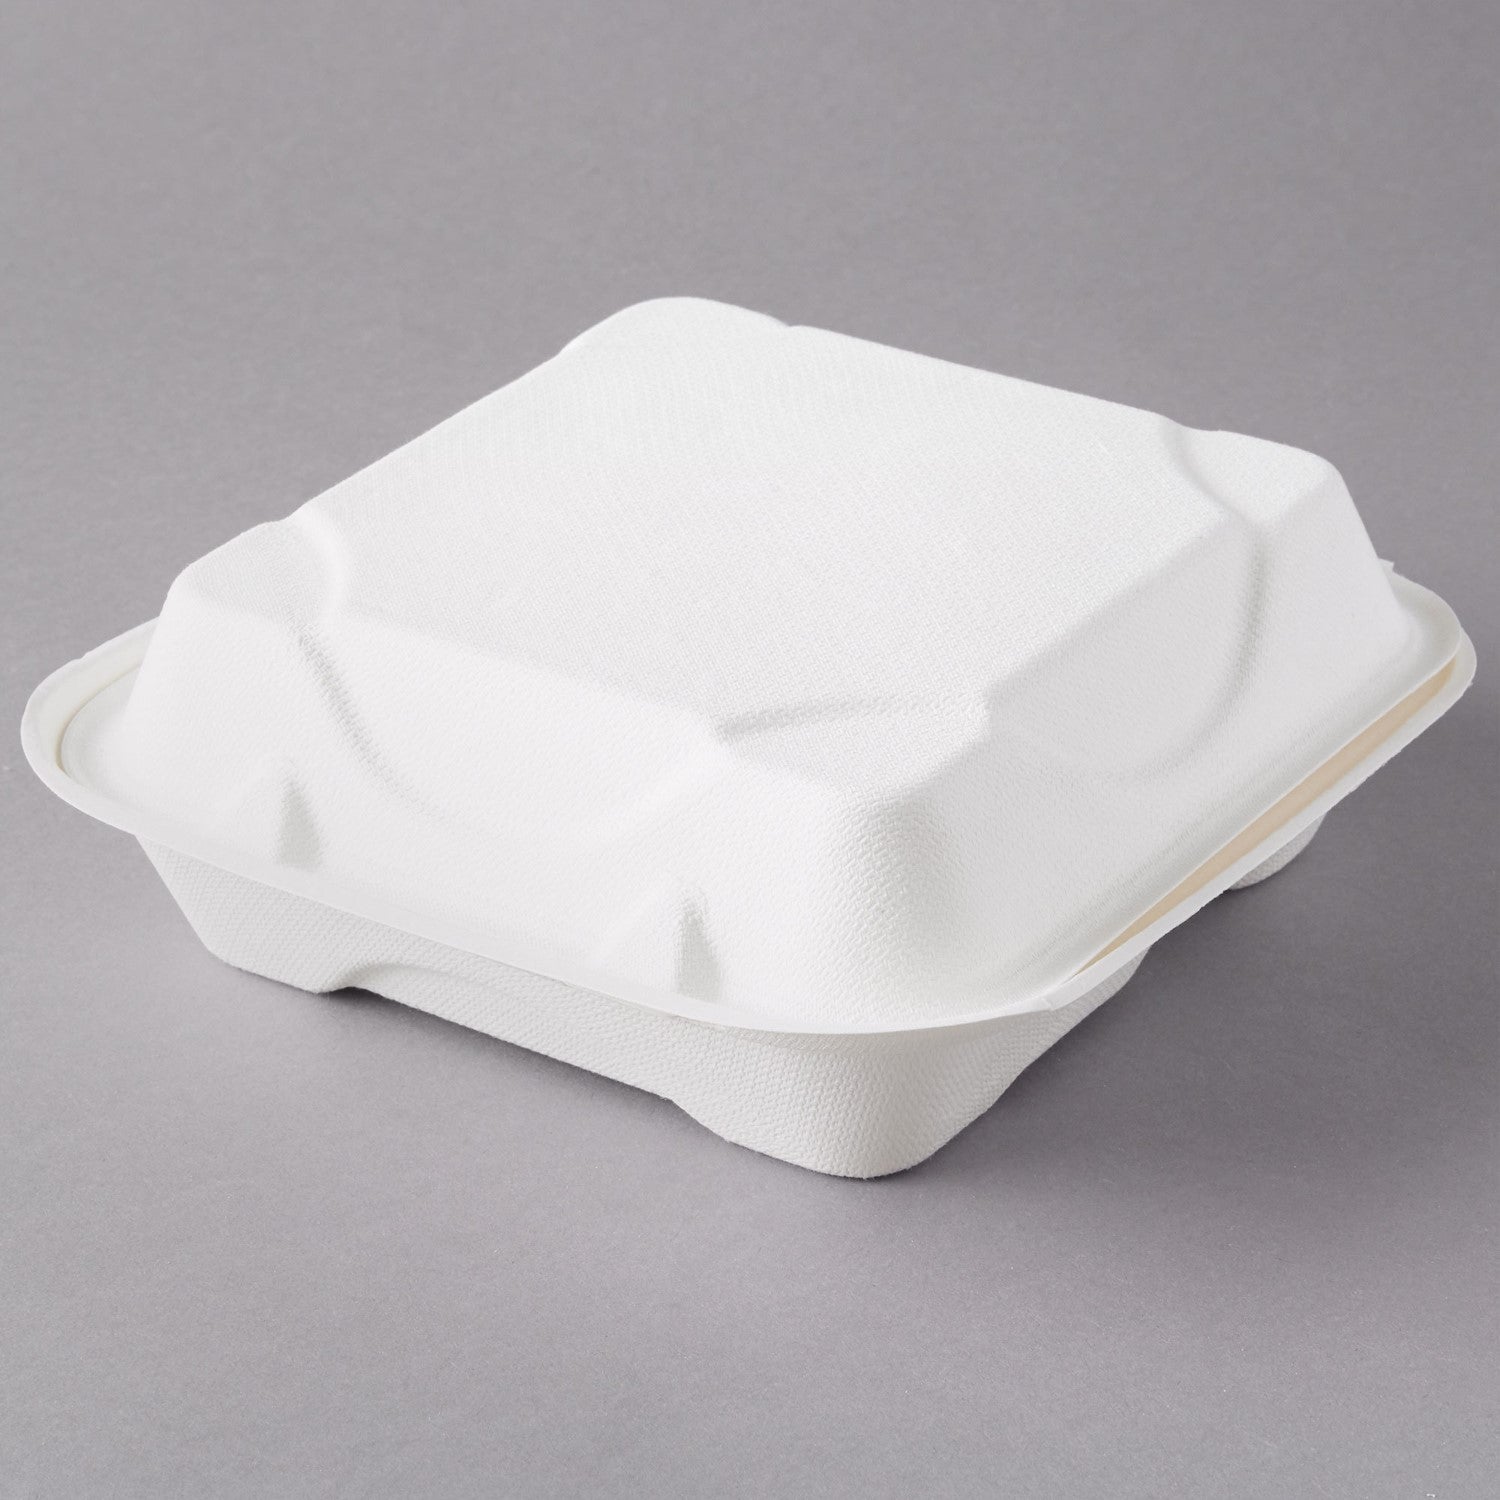 Compostable 3-Compartment Hinged Clamshell Take Out Food Containers  9x9x3,Heavy Duty Quality Square Disposable to go Containers, Eco-Friendly  Takeout